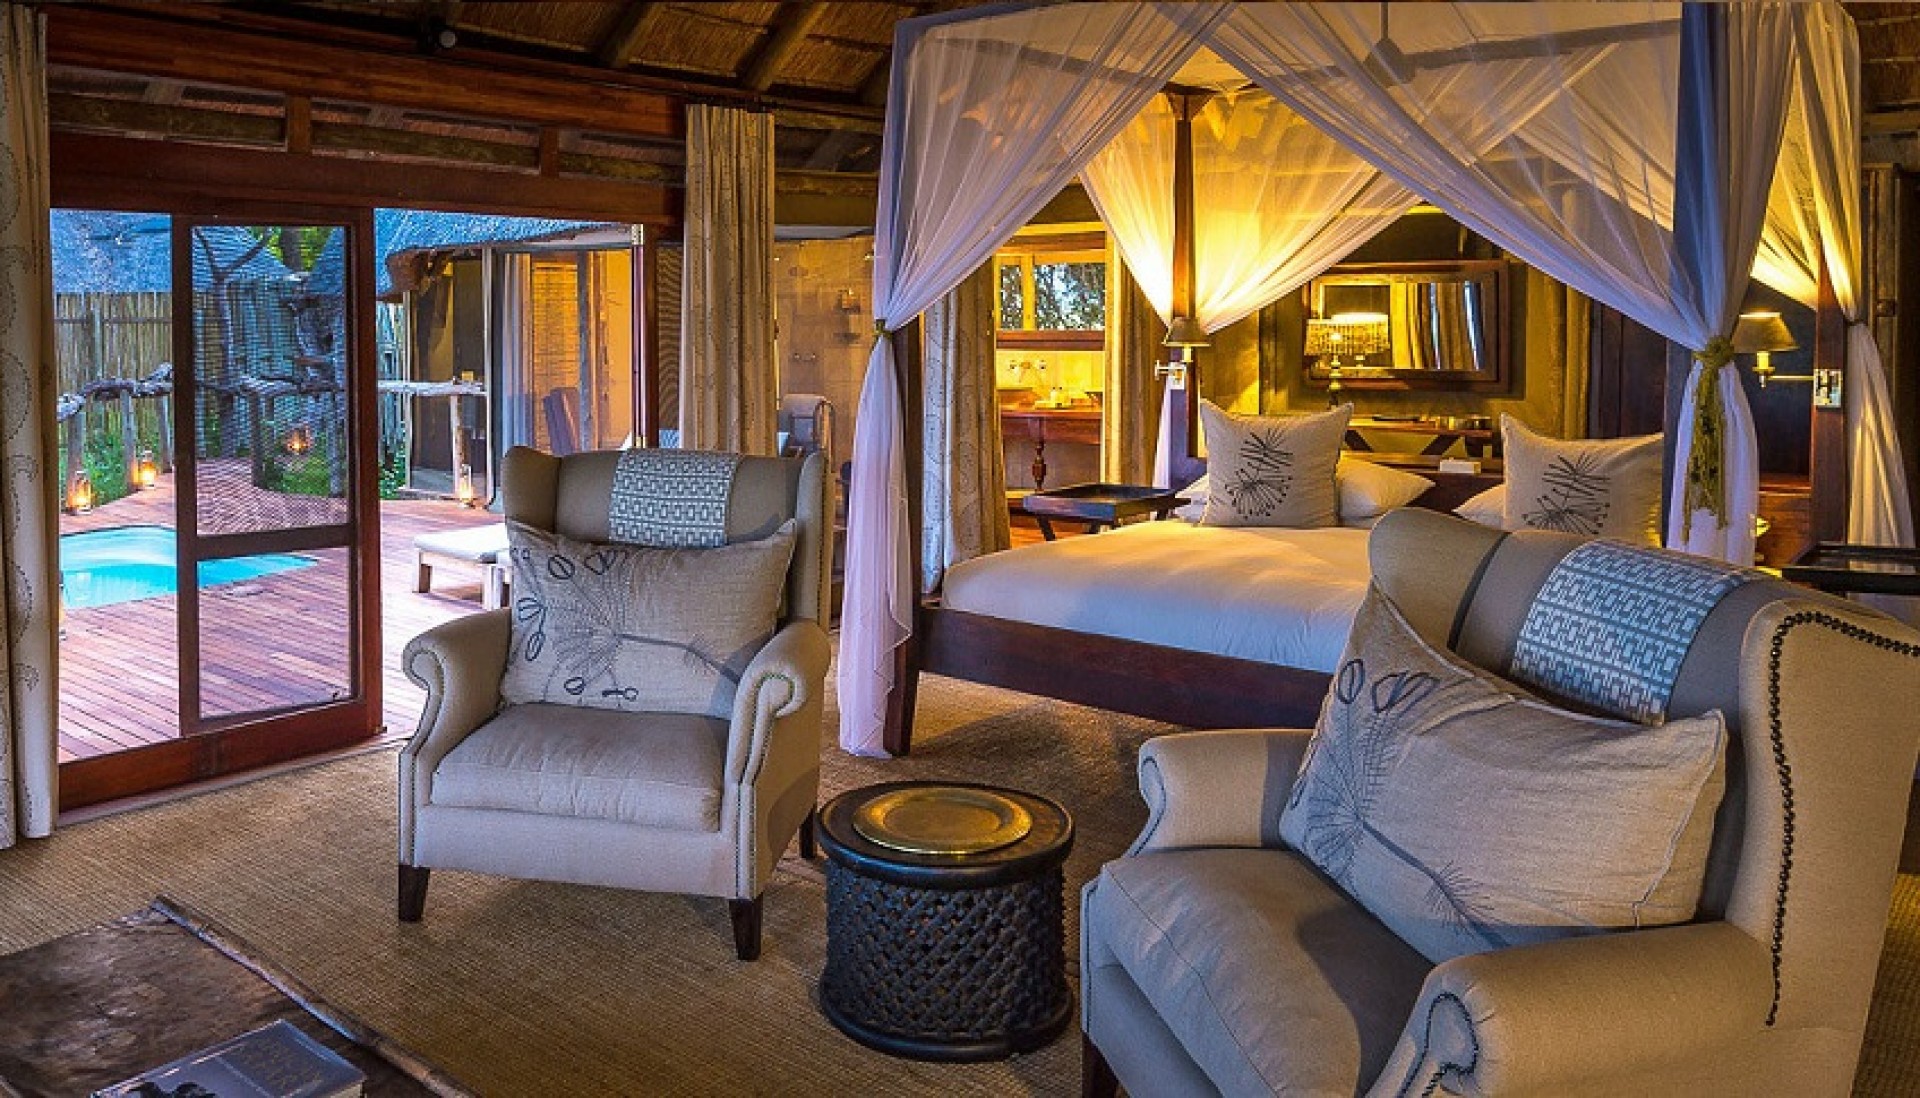 Top 10 luxury safari lodges and camps